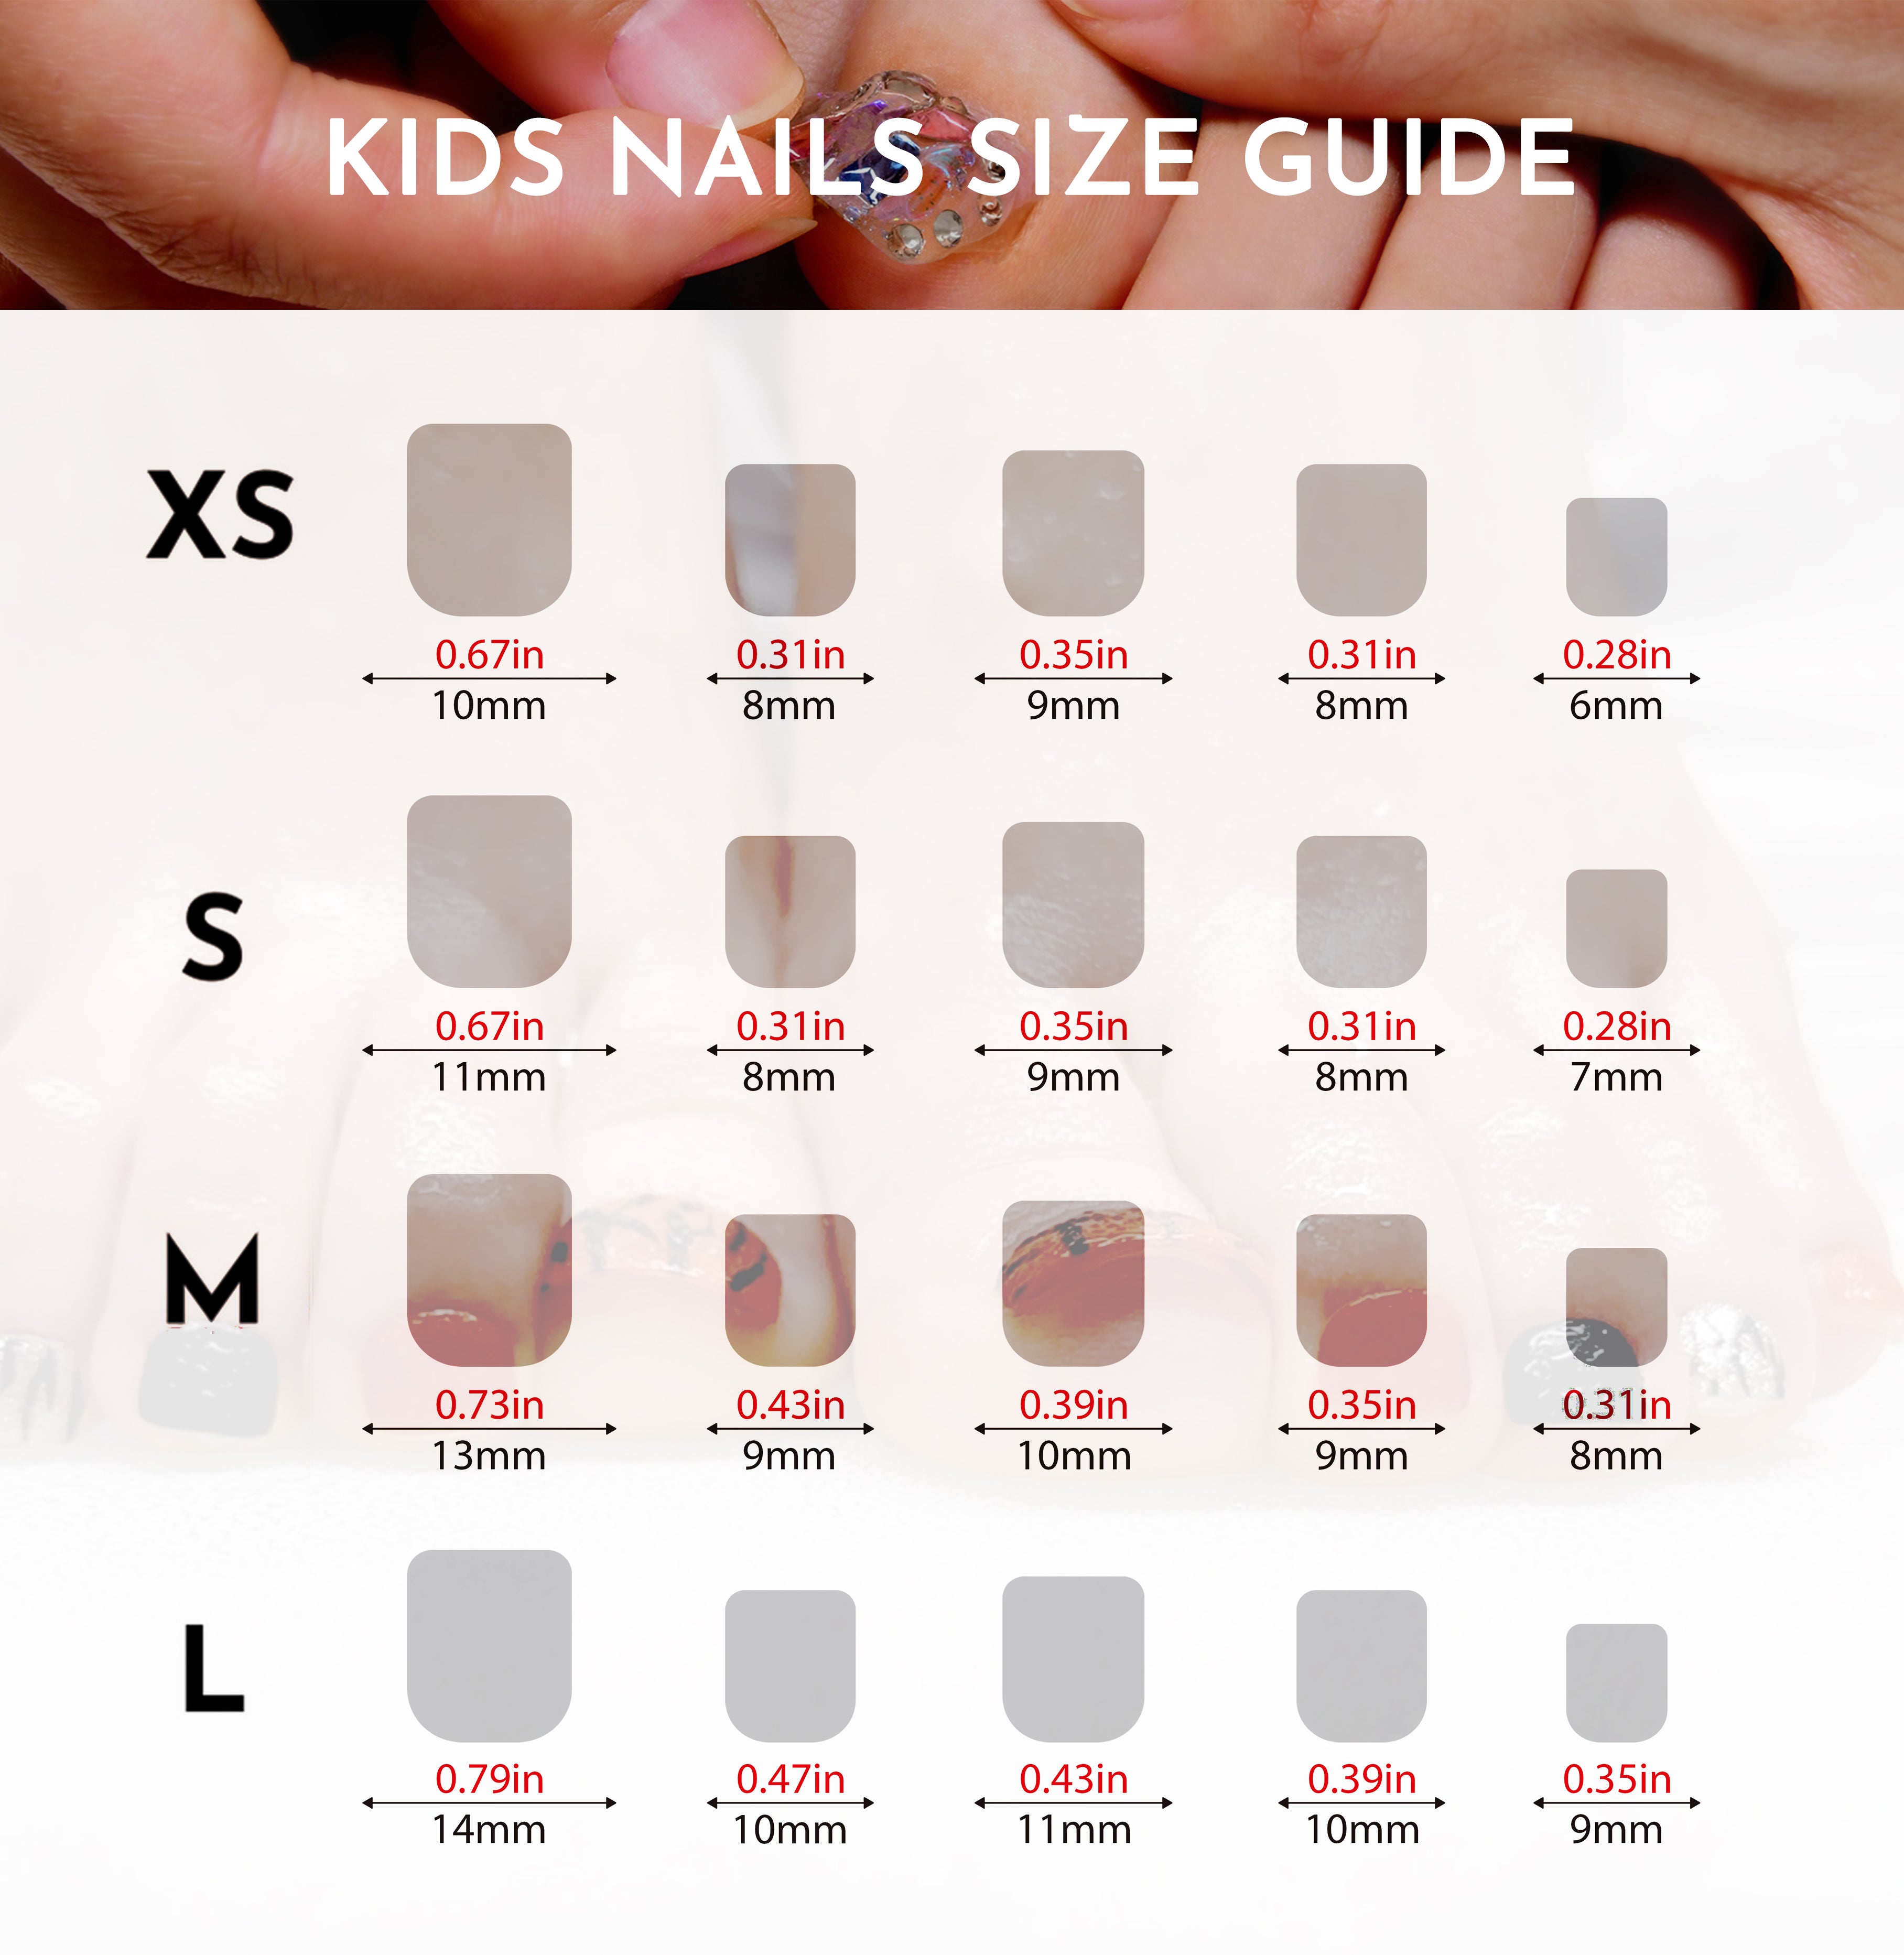 Candy Delight Kid's Nails